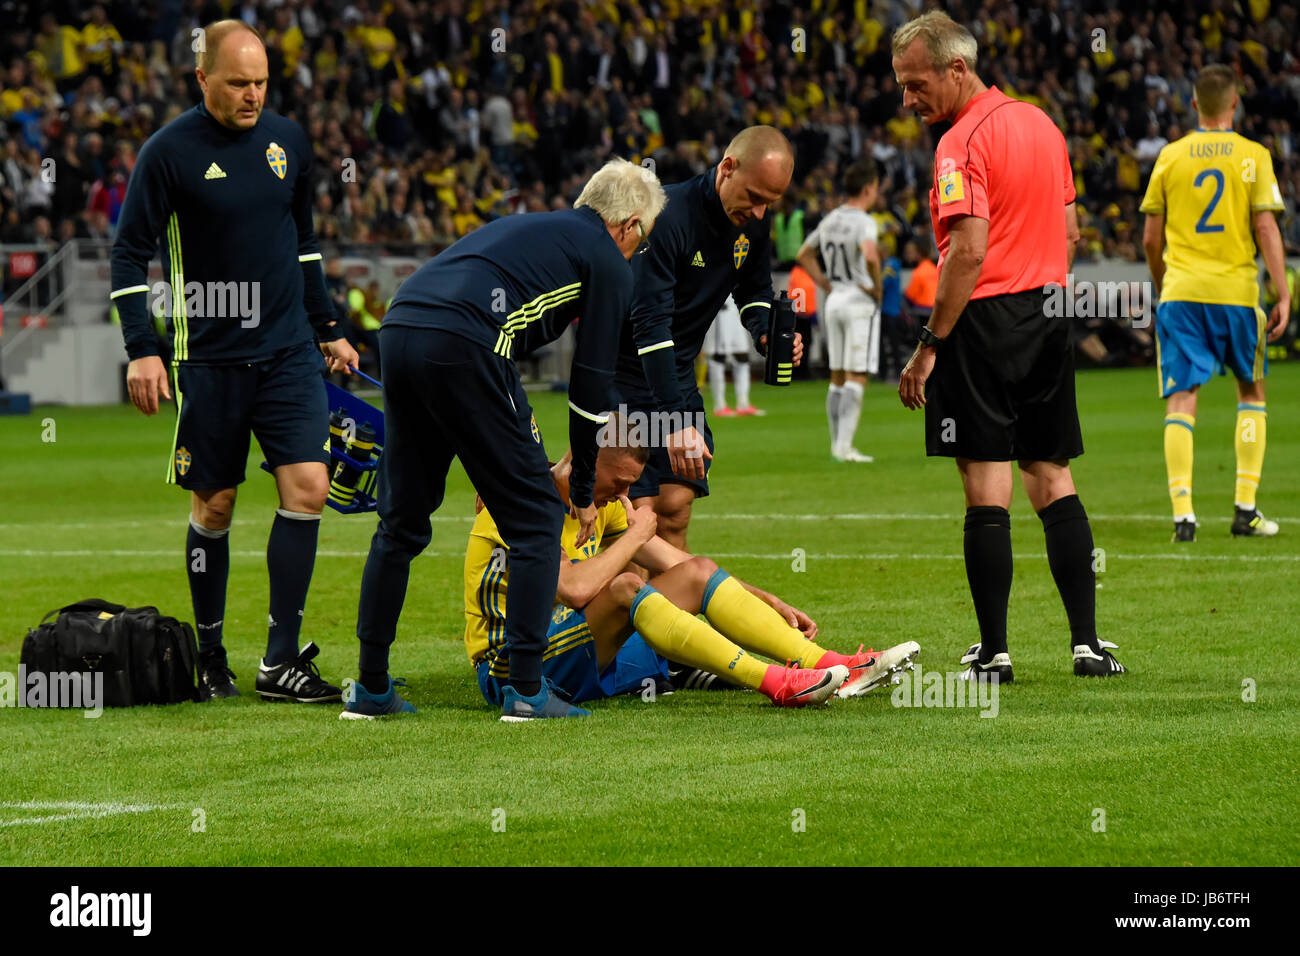 Stockholm, Sweden. 9th June, 2017. Sweden 9 Marcus Berg get help from the swedish doctor team after the bang in connection with 1-1 goal in the FIFA World Cup™ Qualifiers game between Sweden and France. Credit: Bror Persson/Frilansfotograferna/Alamy Live News Stock Photo